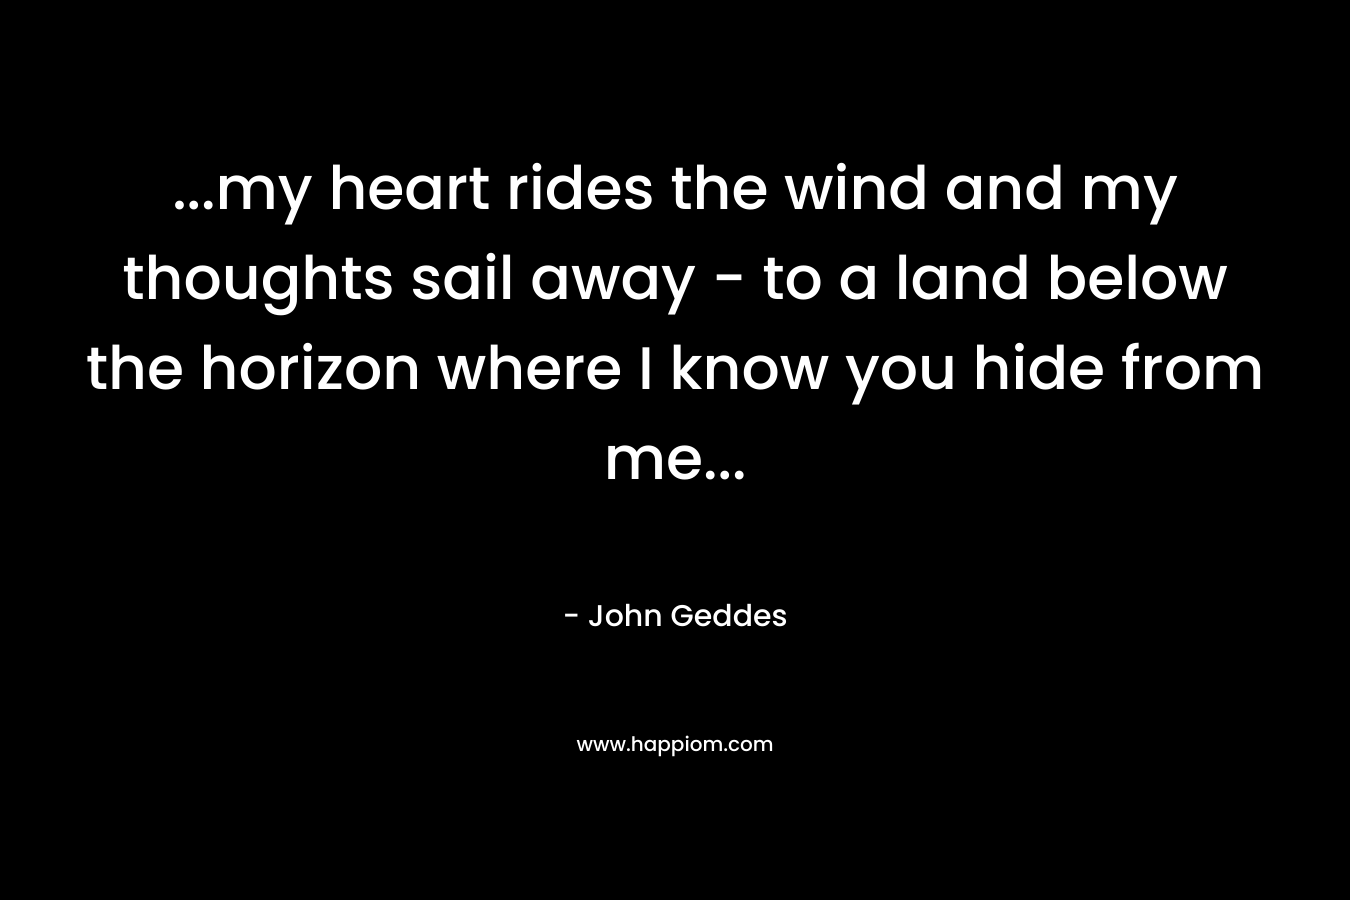 …my heart rides the wind and my thoughts sail away – to a land below the horizon where I know you hide from me… – John Geddes